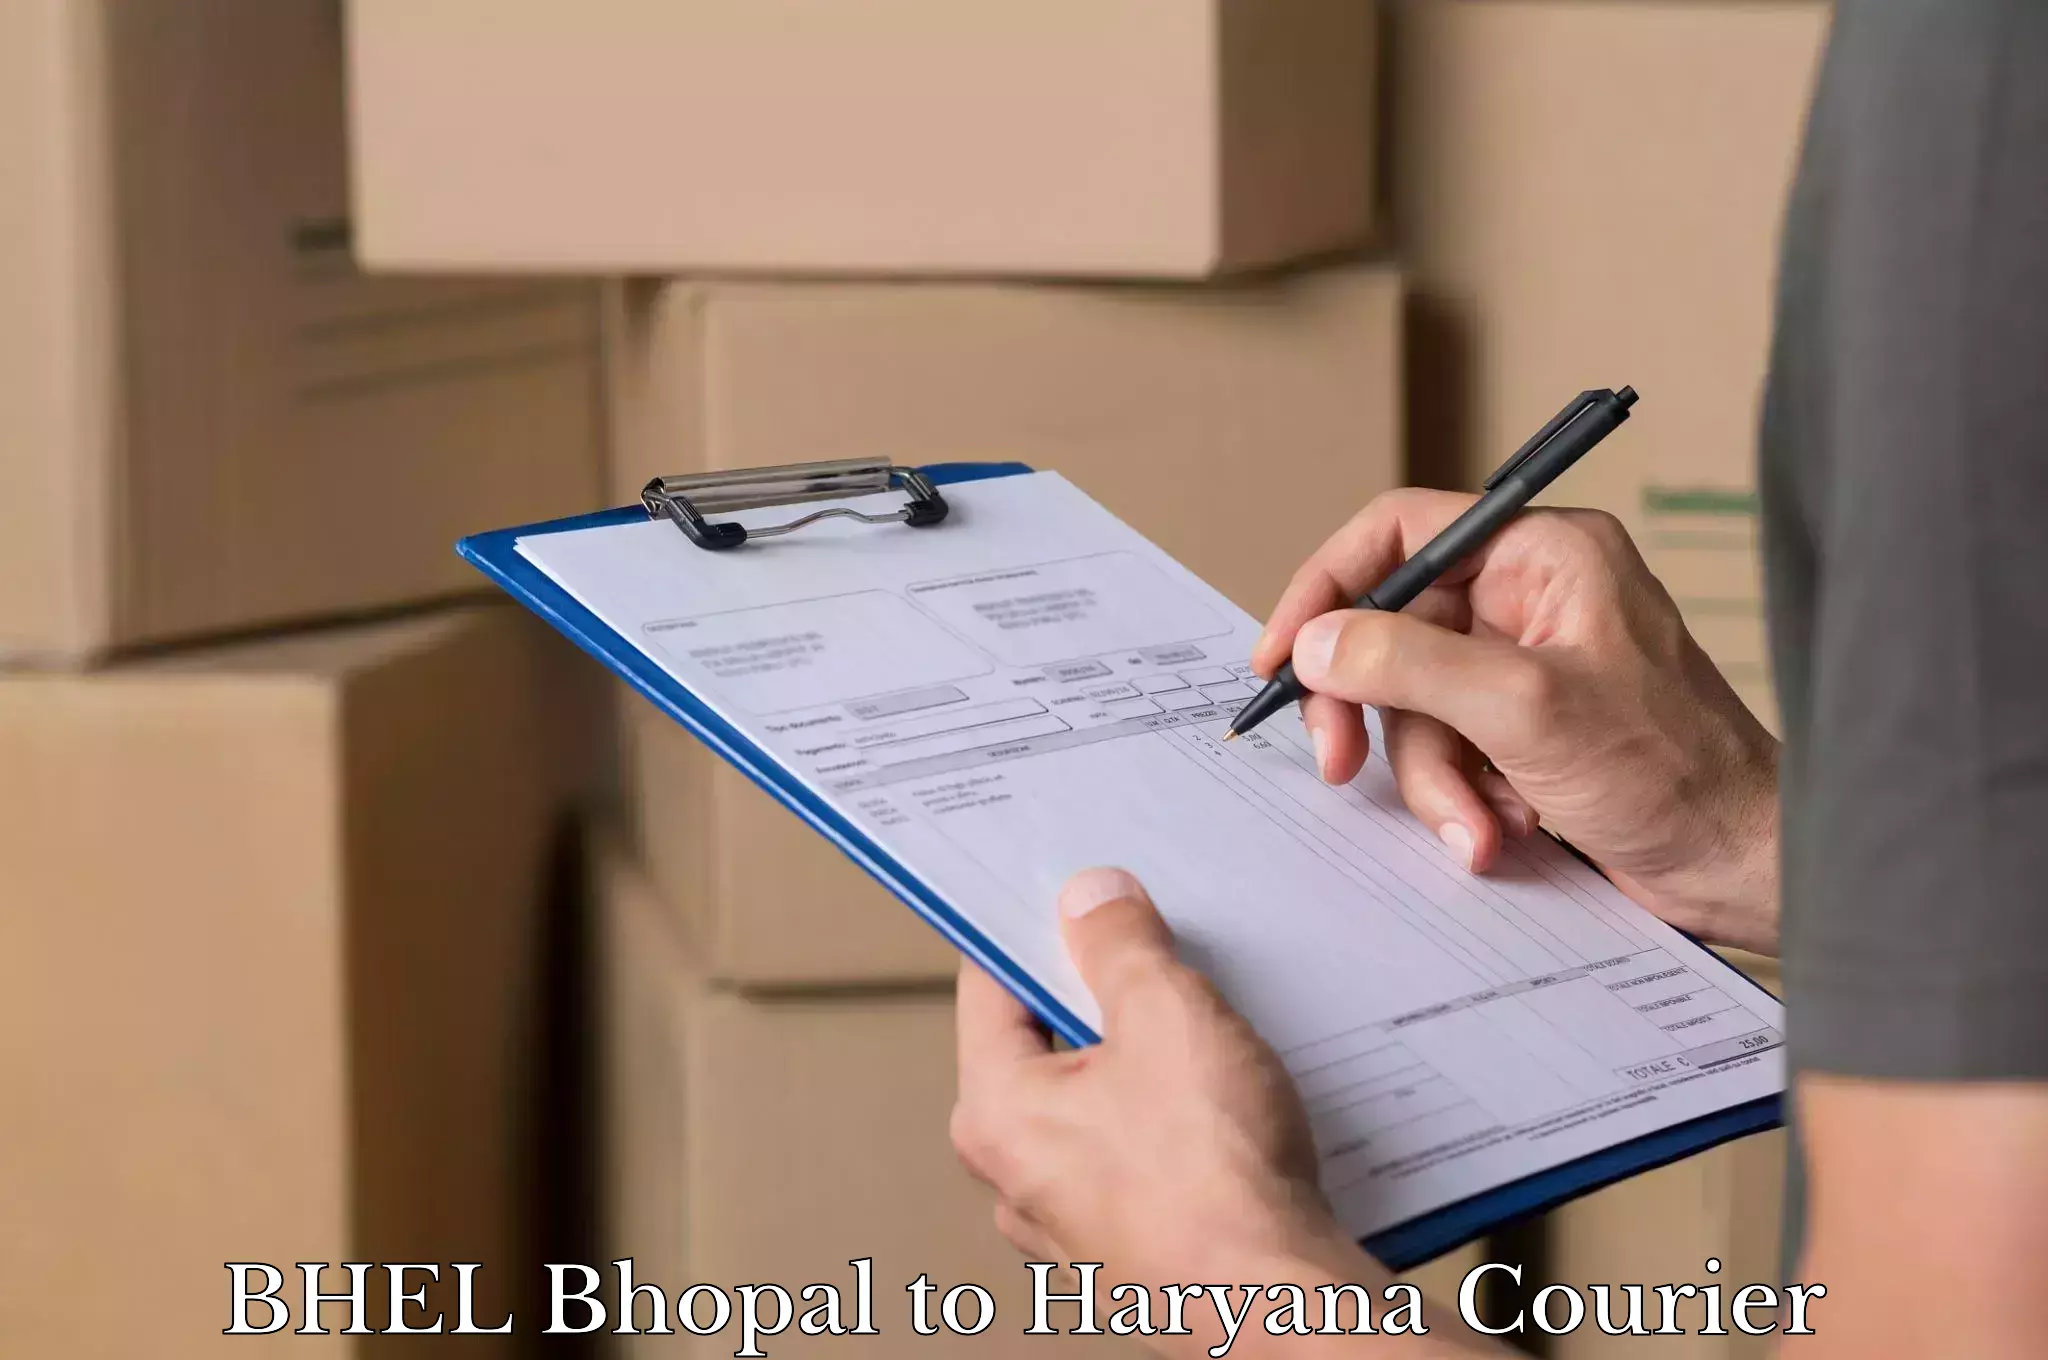 Luggage delivery app BHEL Bhopal to Faridabad